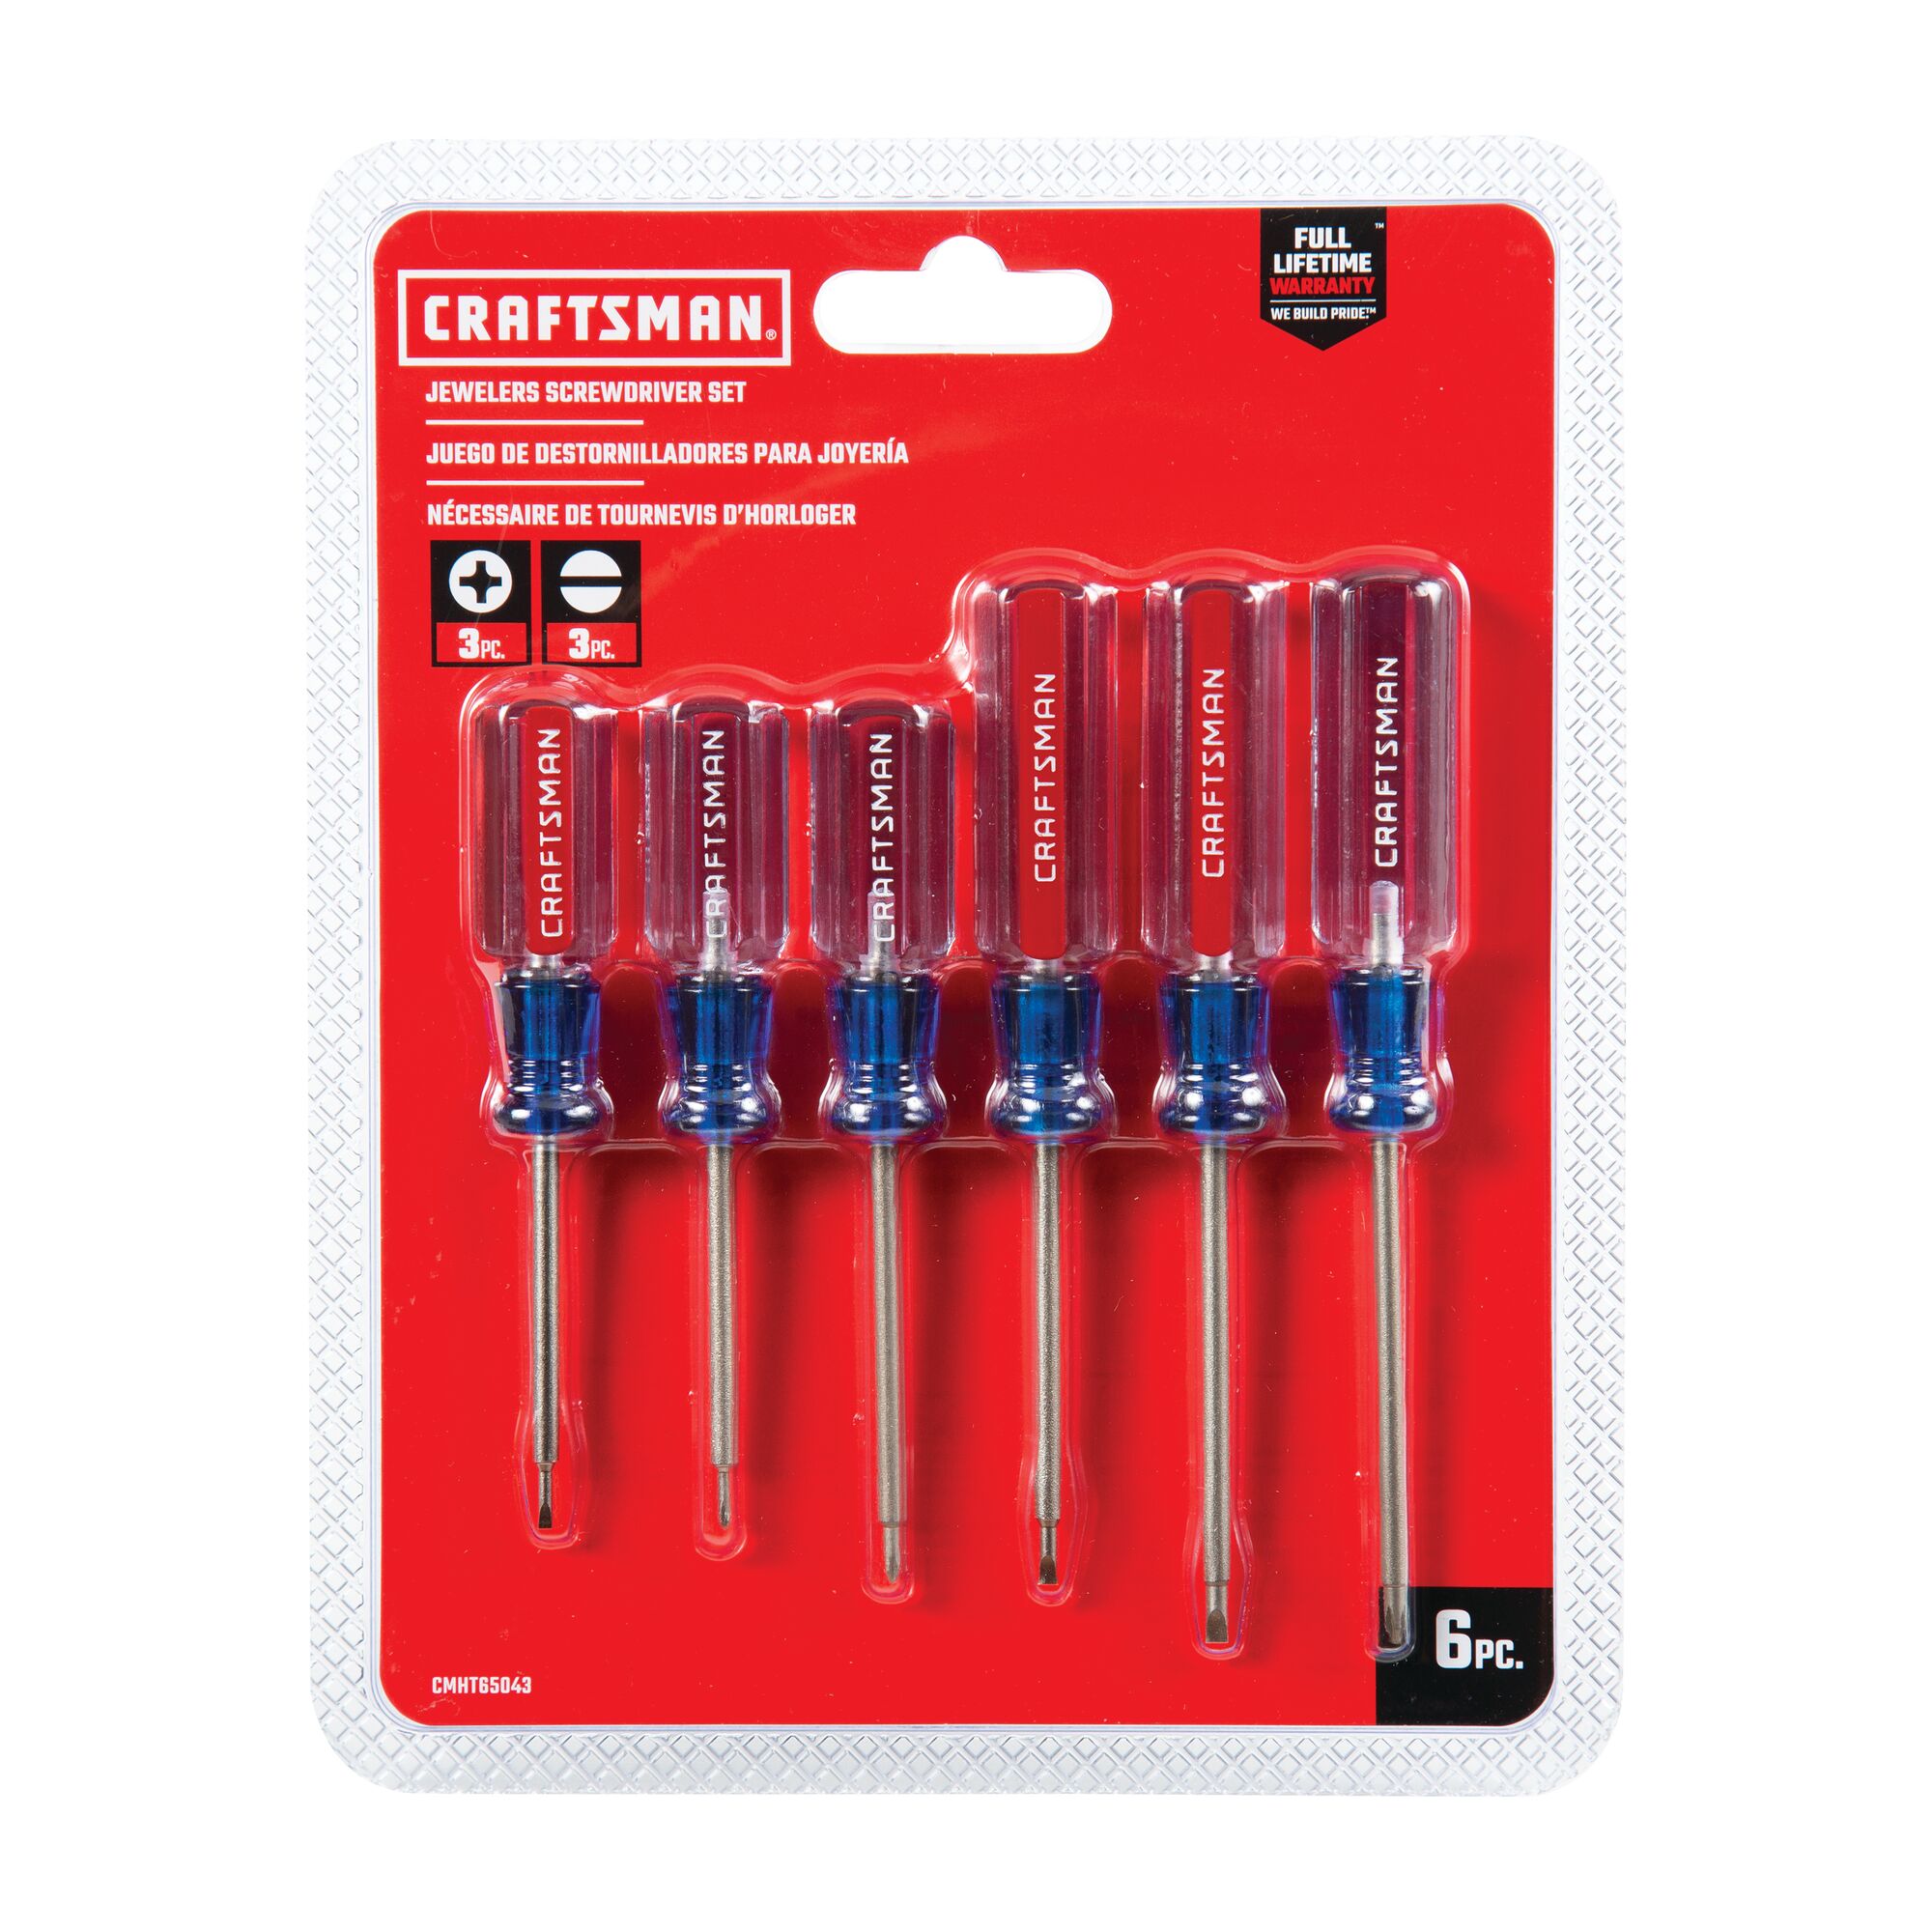 6 Piece Jewelers ScrewDriver Set in carded packaging.